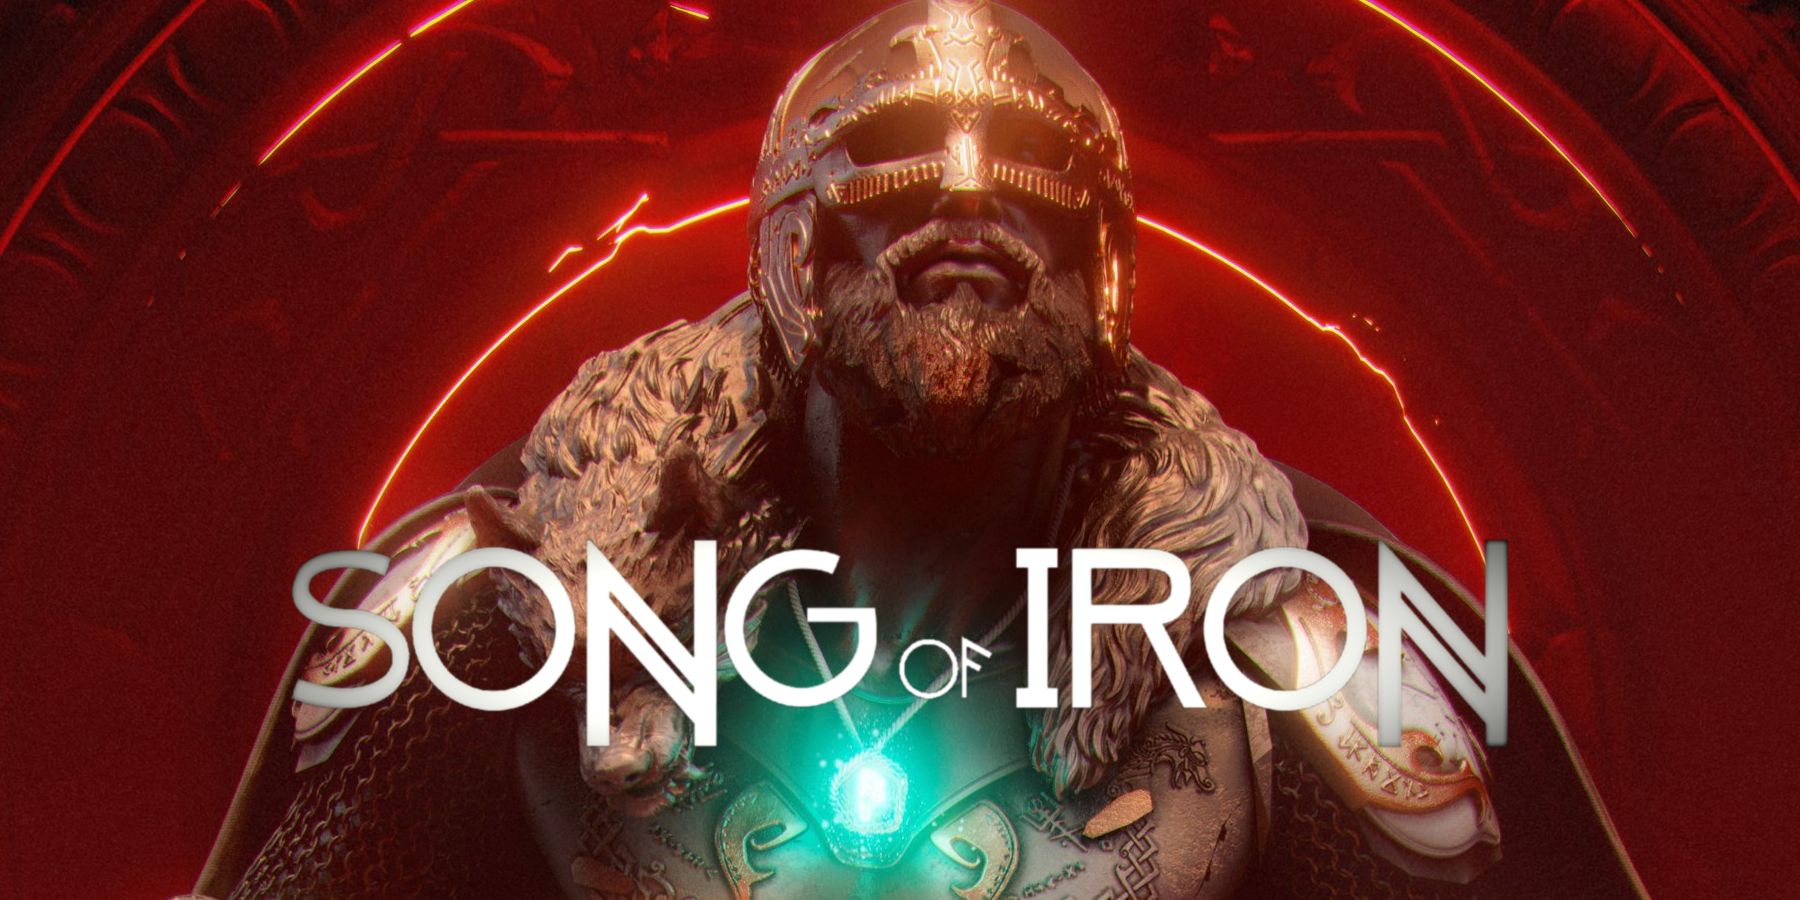 song of iron (2)